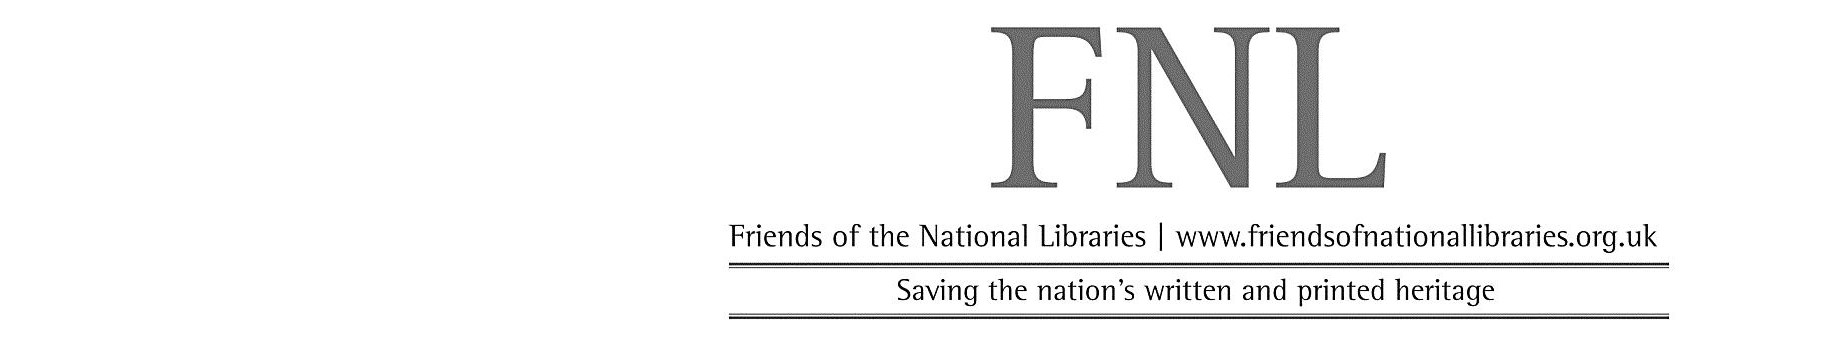 Friends of the National Libraries